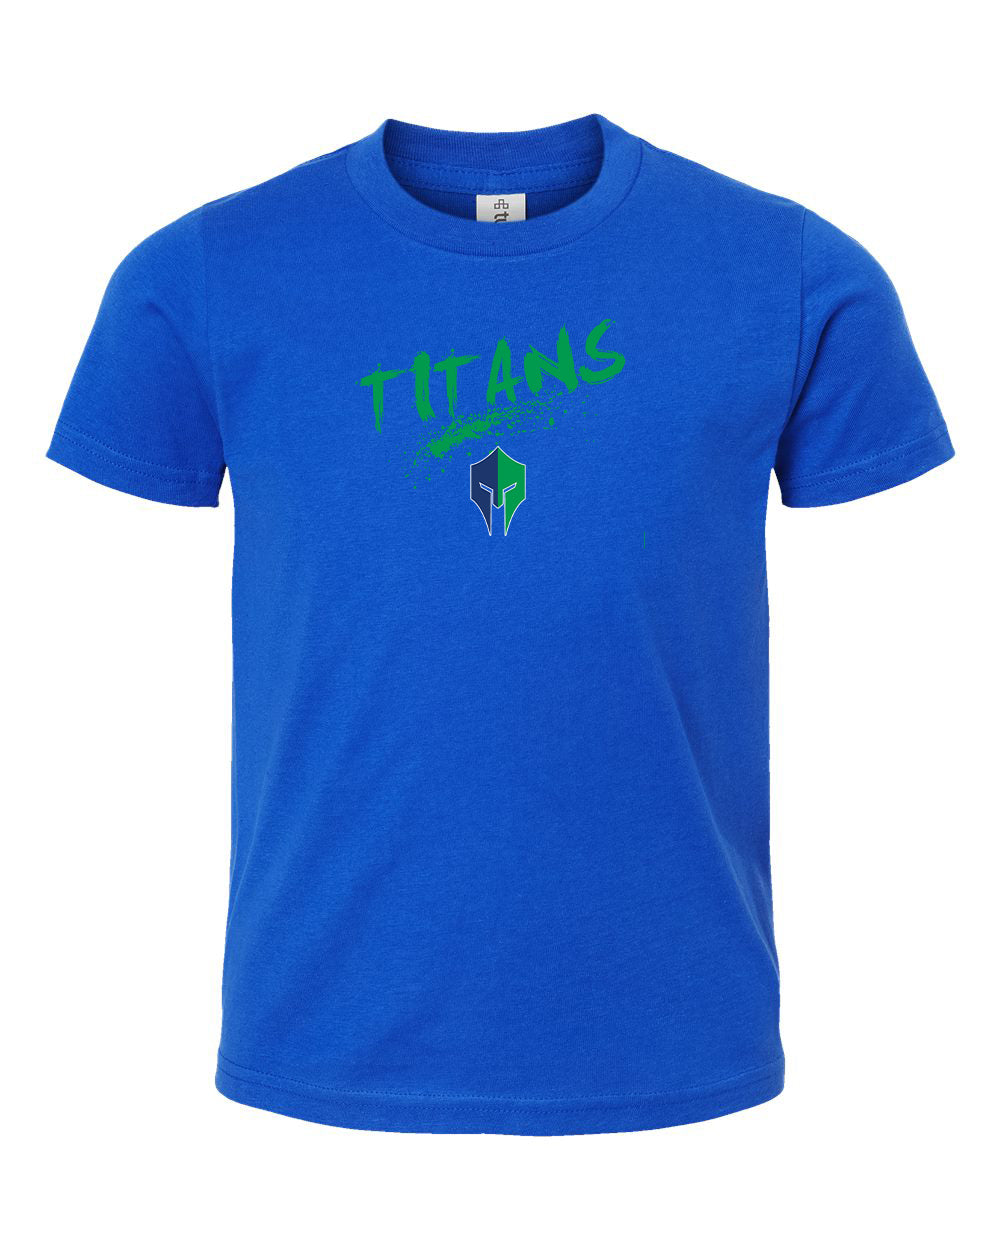 Titans Youth Jersey Tee "300" - 235 (color options available)